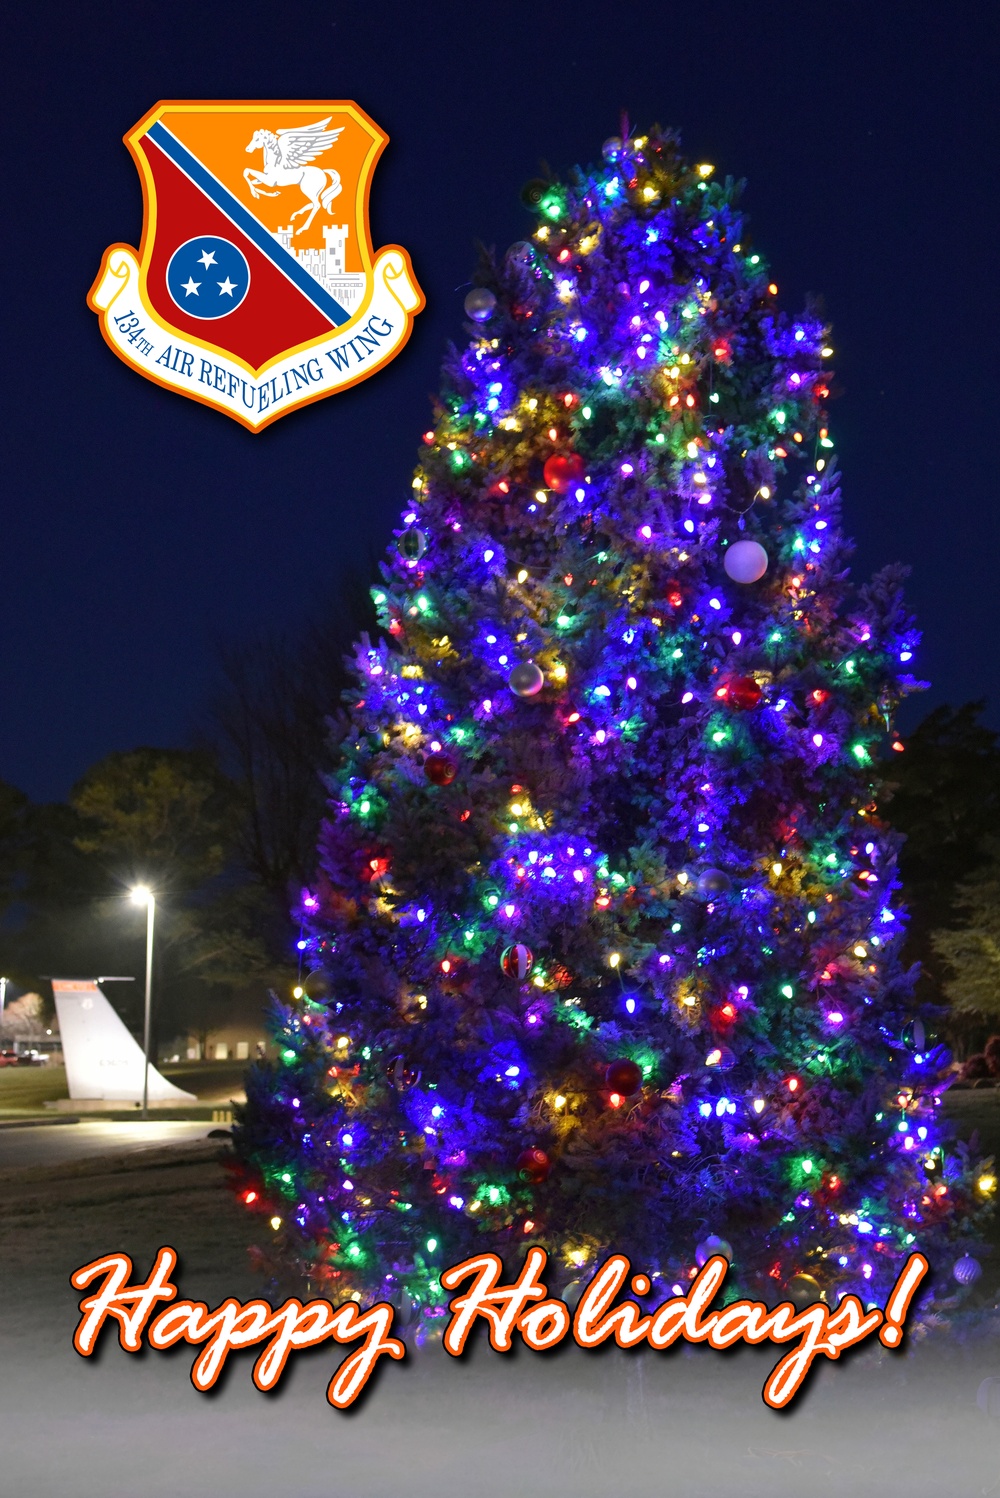 134th Air Refueling Wing Holiday Greeting for social media